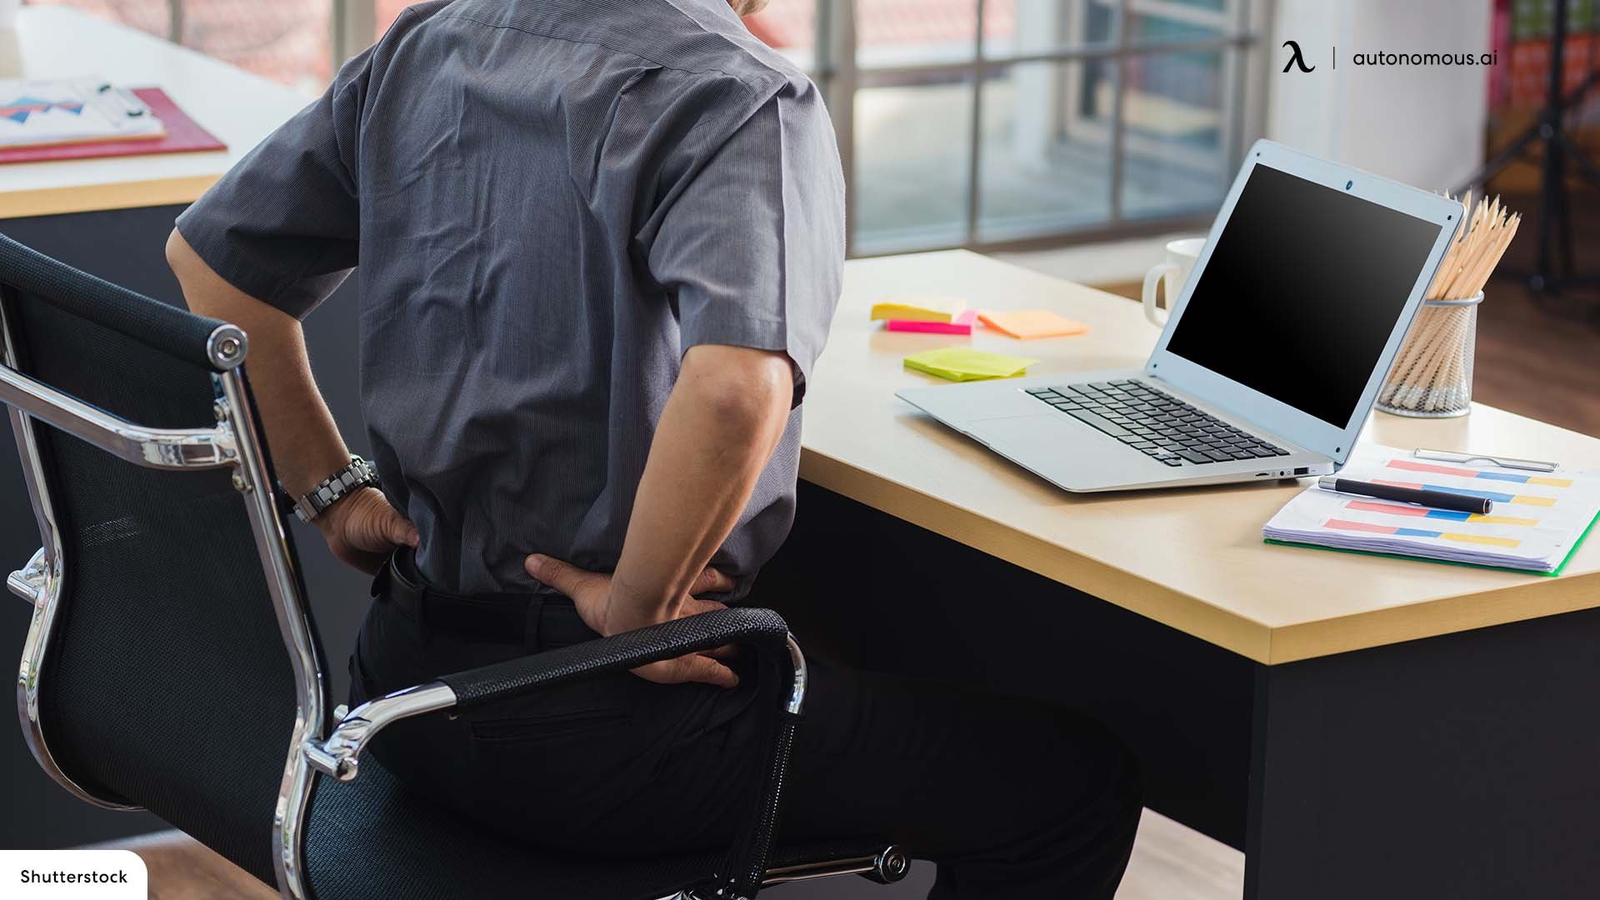 10 Therapeutic Office Chairs for Sitting Long Hours